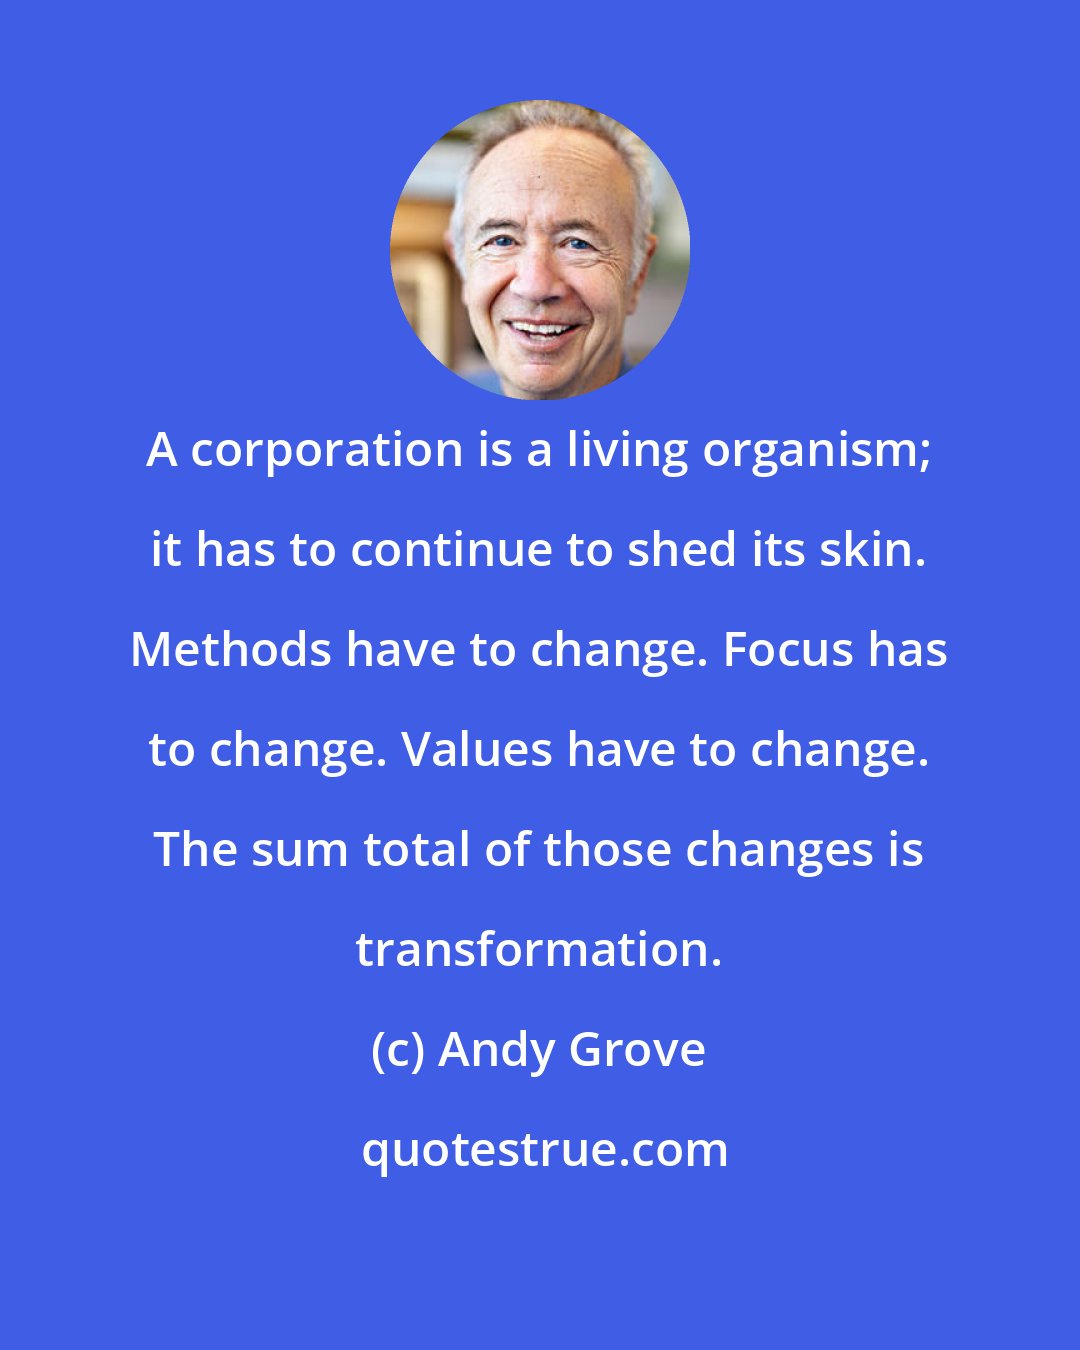 Andy Grove: A corporation is a living organism; it has to continue to shed its skin. Methods have to change. Focus has to change. Values have to change. The sum total of those changes is transformation.